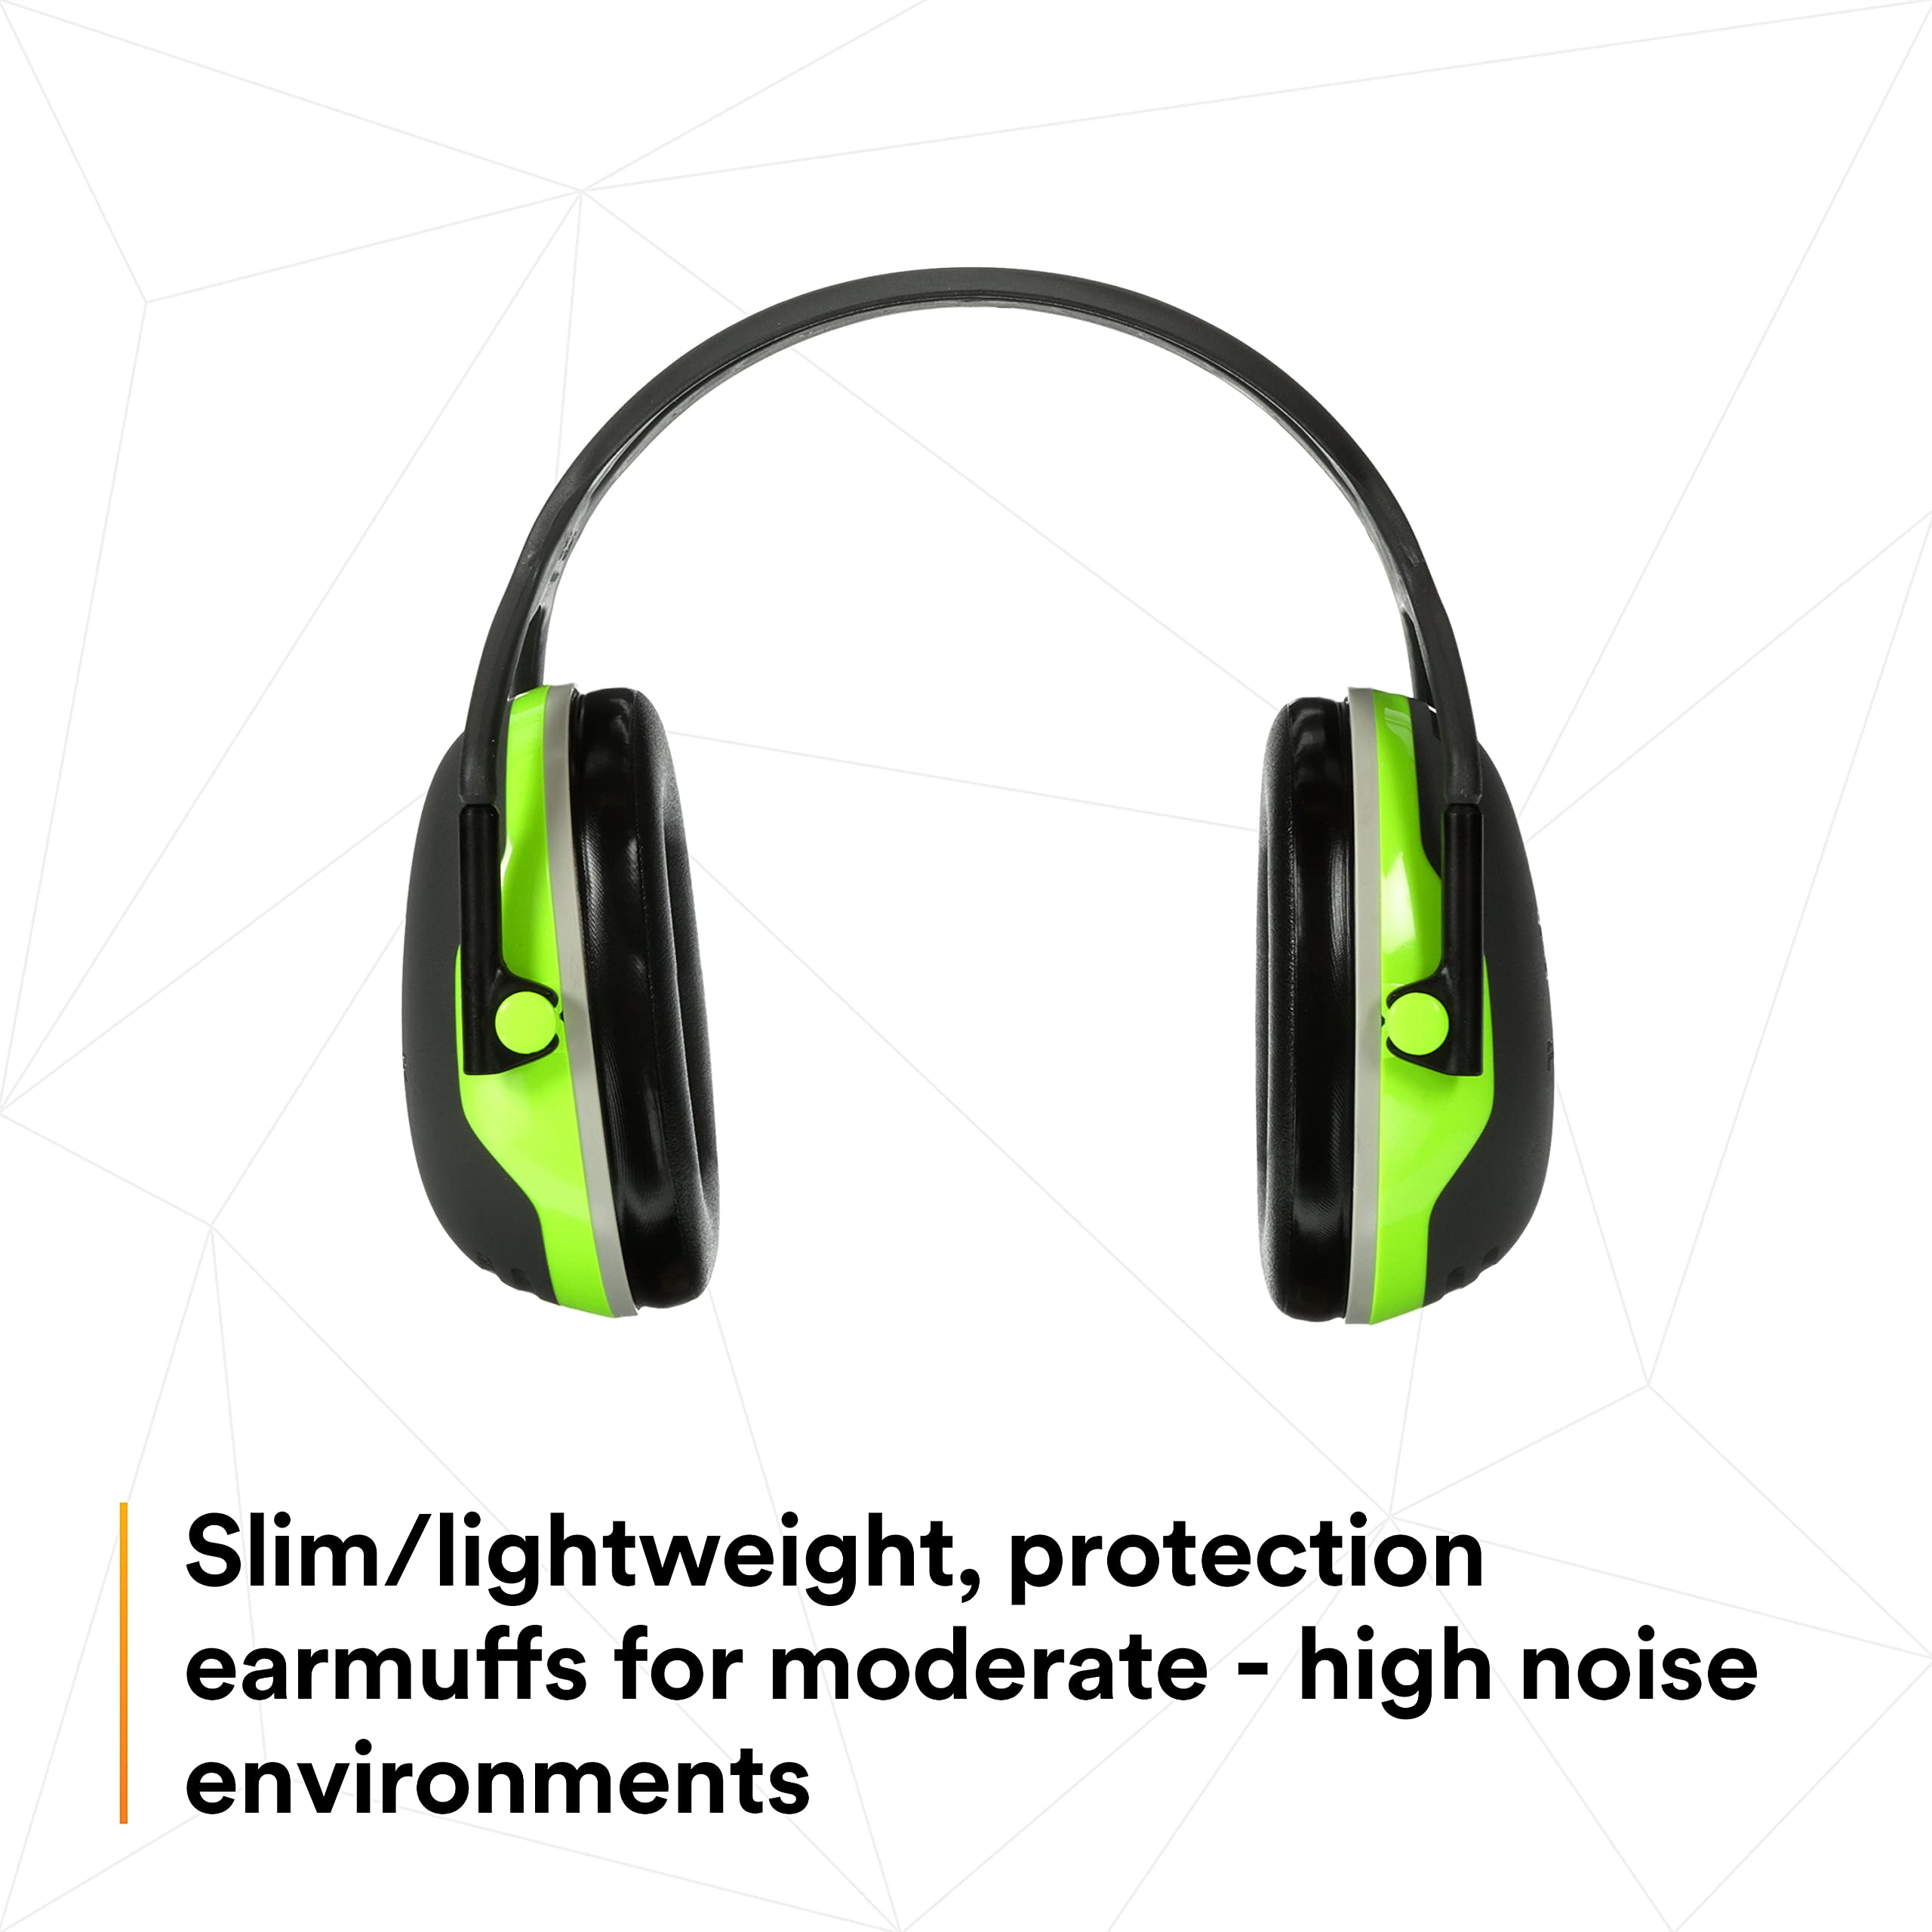 3M Peltor X4A Over-the-Head Ear Muffs, Noise Protection, NRR 27 dB, Construction, Manufacturing, Maintenance, Automotive, Woodworking, Heavy Engineering, Mining